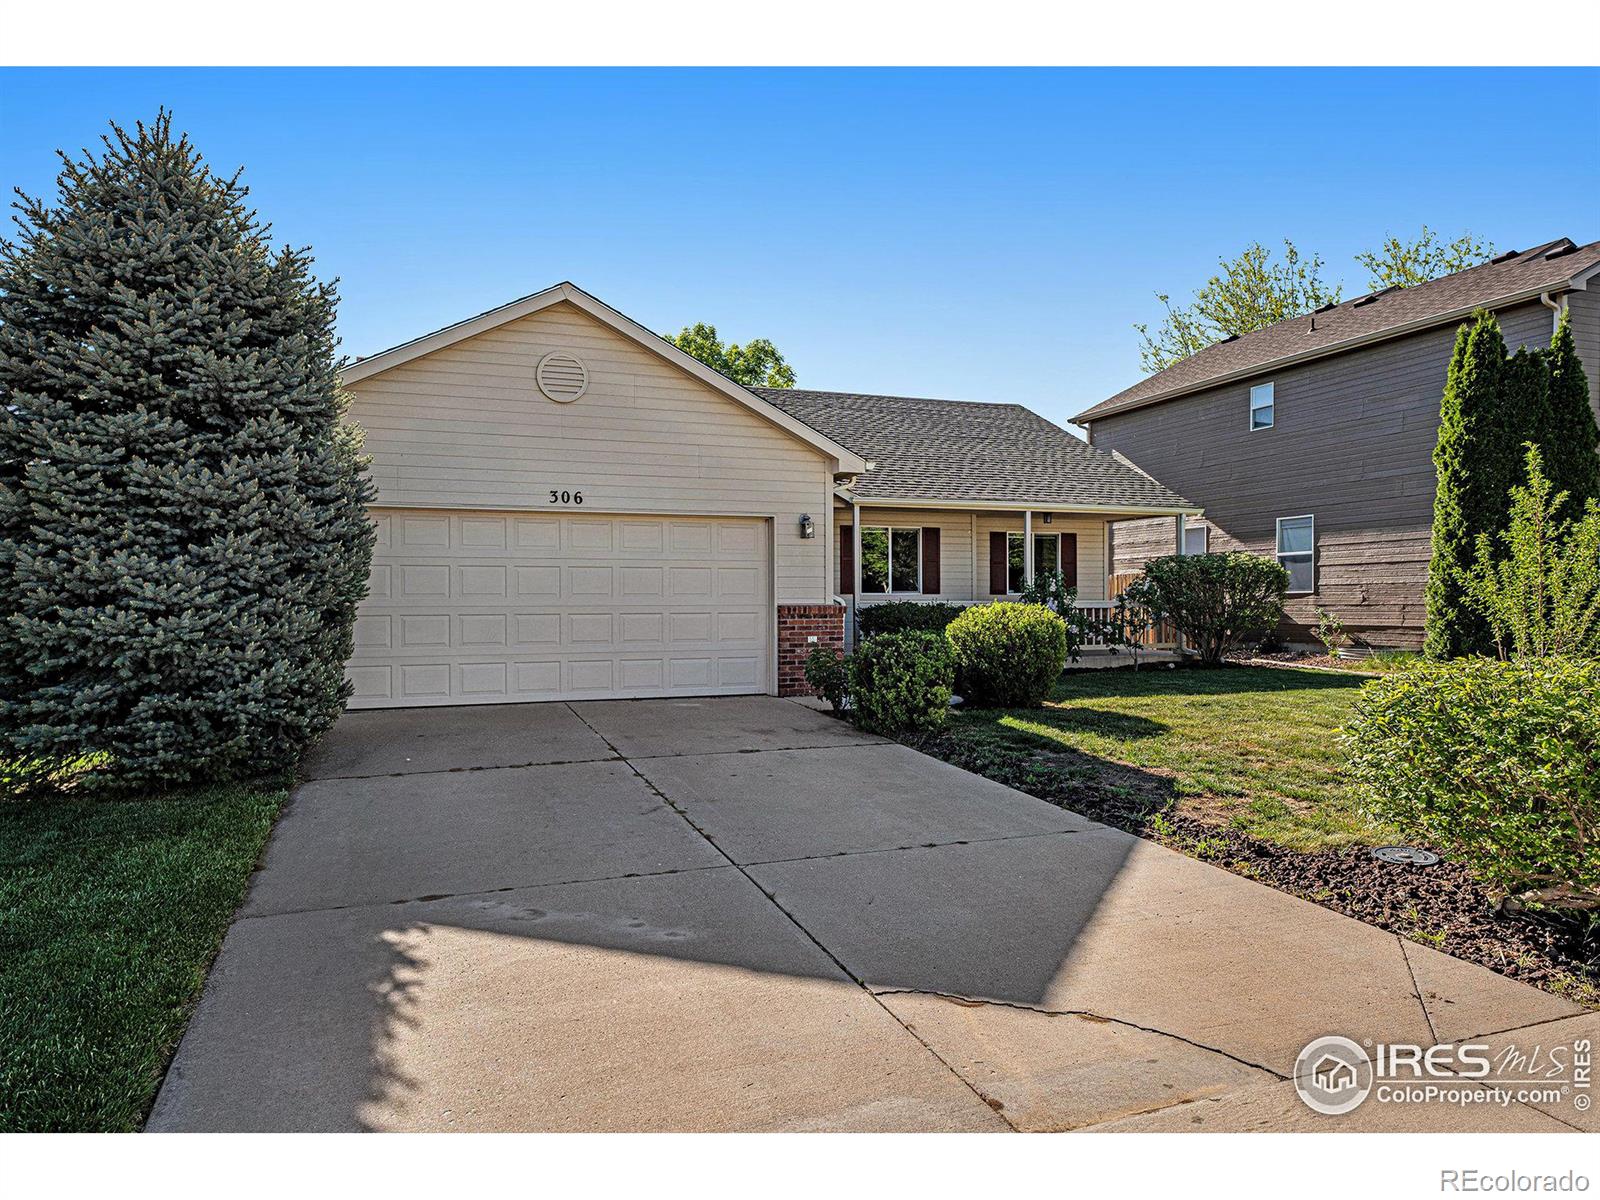 Report Image for 306  52nd Avenue,Greeley, Colorado